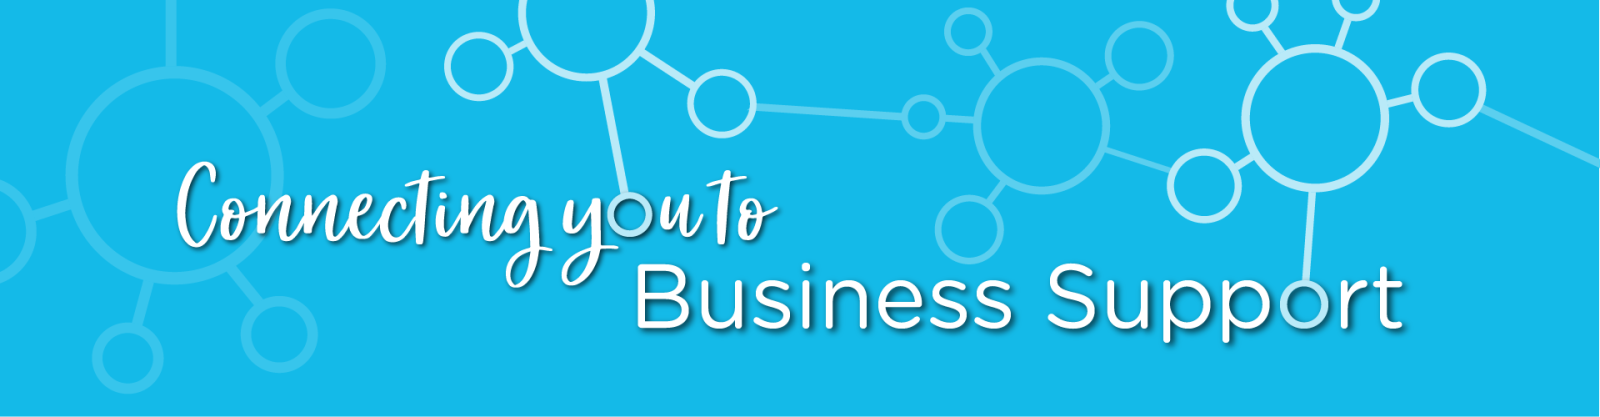 connecting you to business support